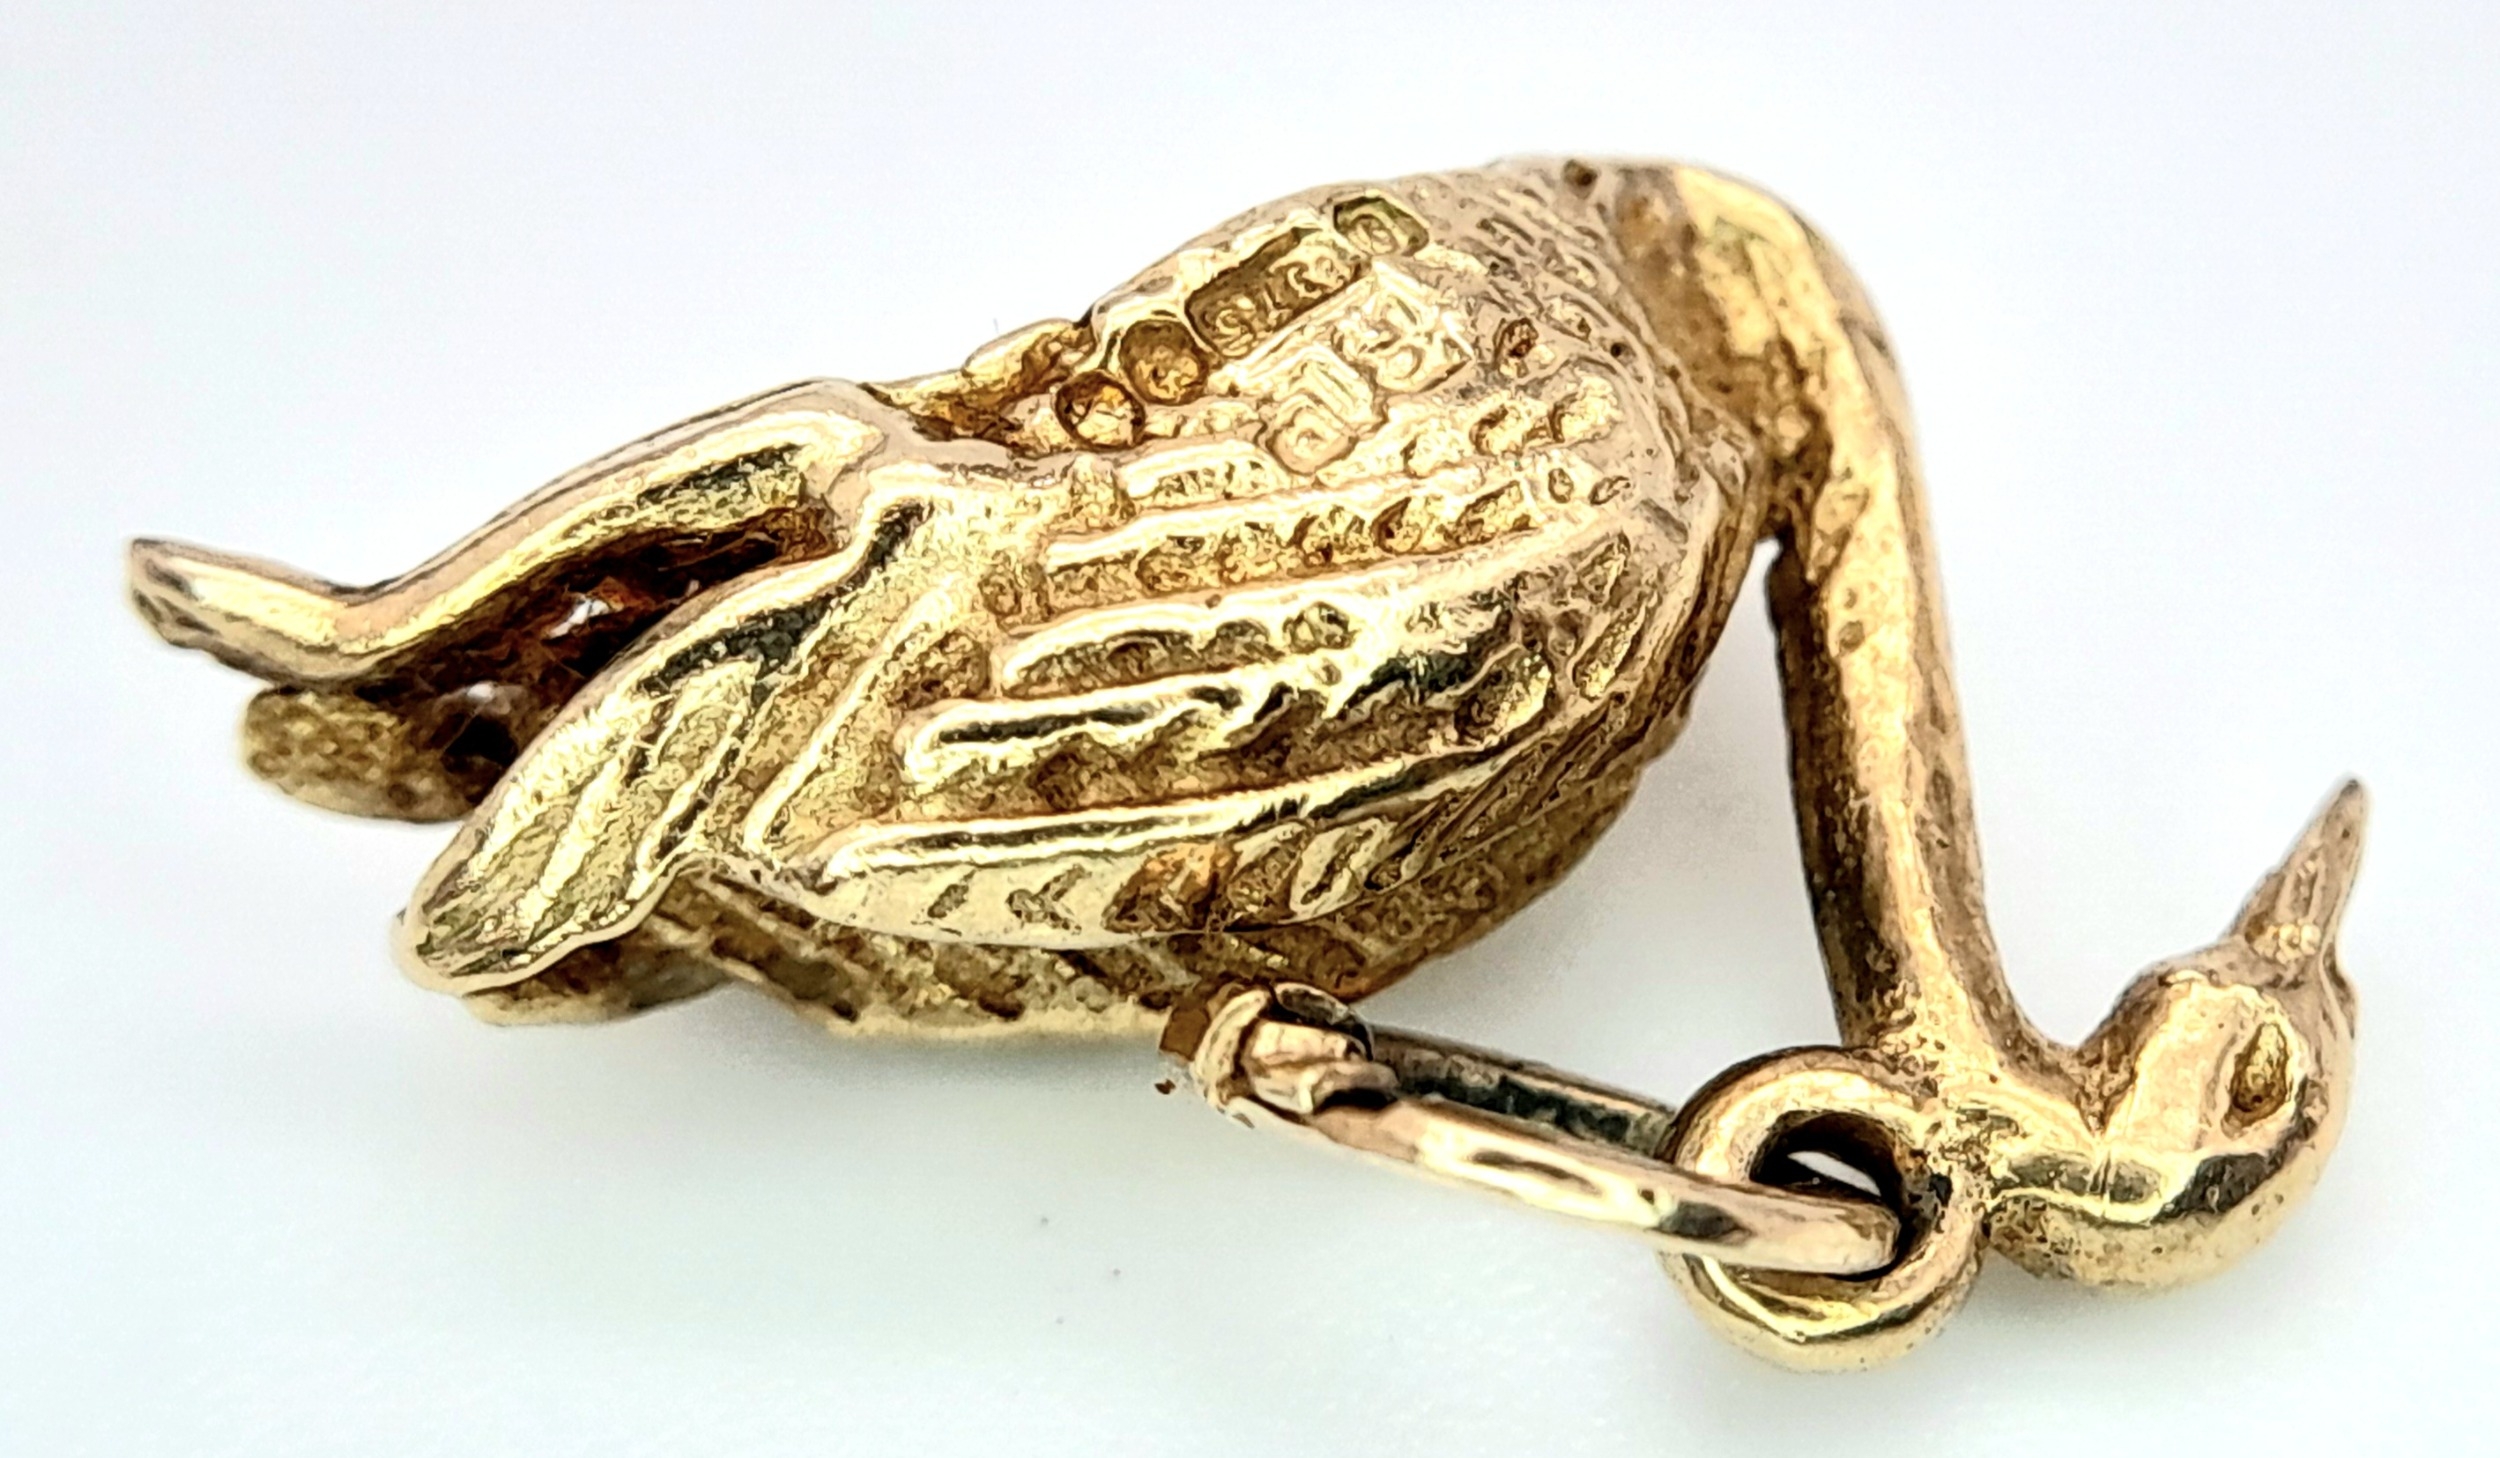 A 9K YELLOW GOLD SWAN CHARM. 19cm x 1.4cm. 1.8g total weight. Ref: SC 8013 - Image 3 of 5